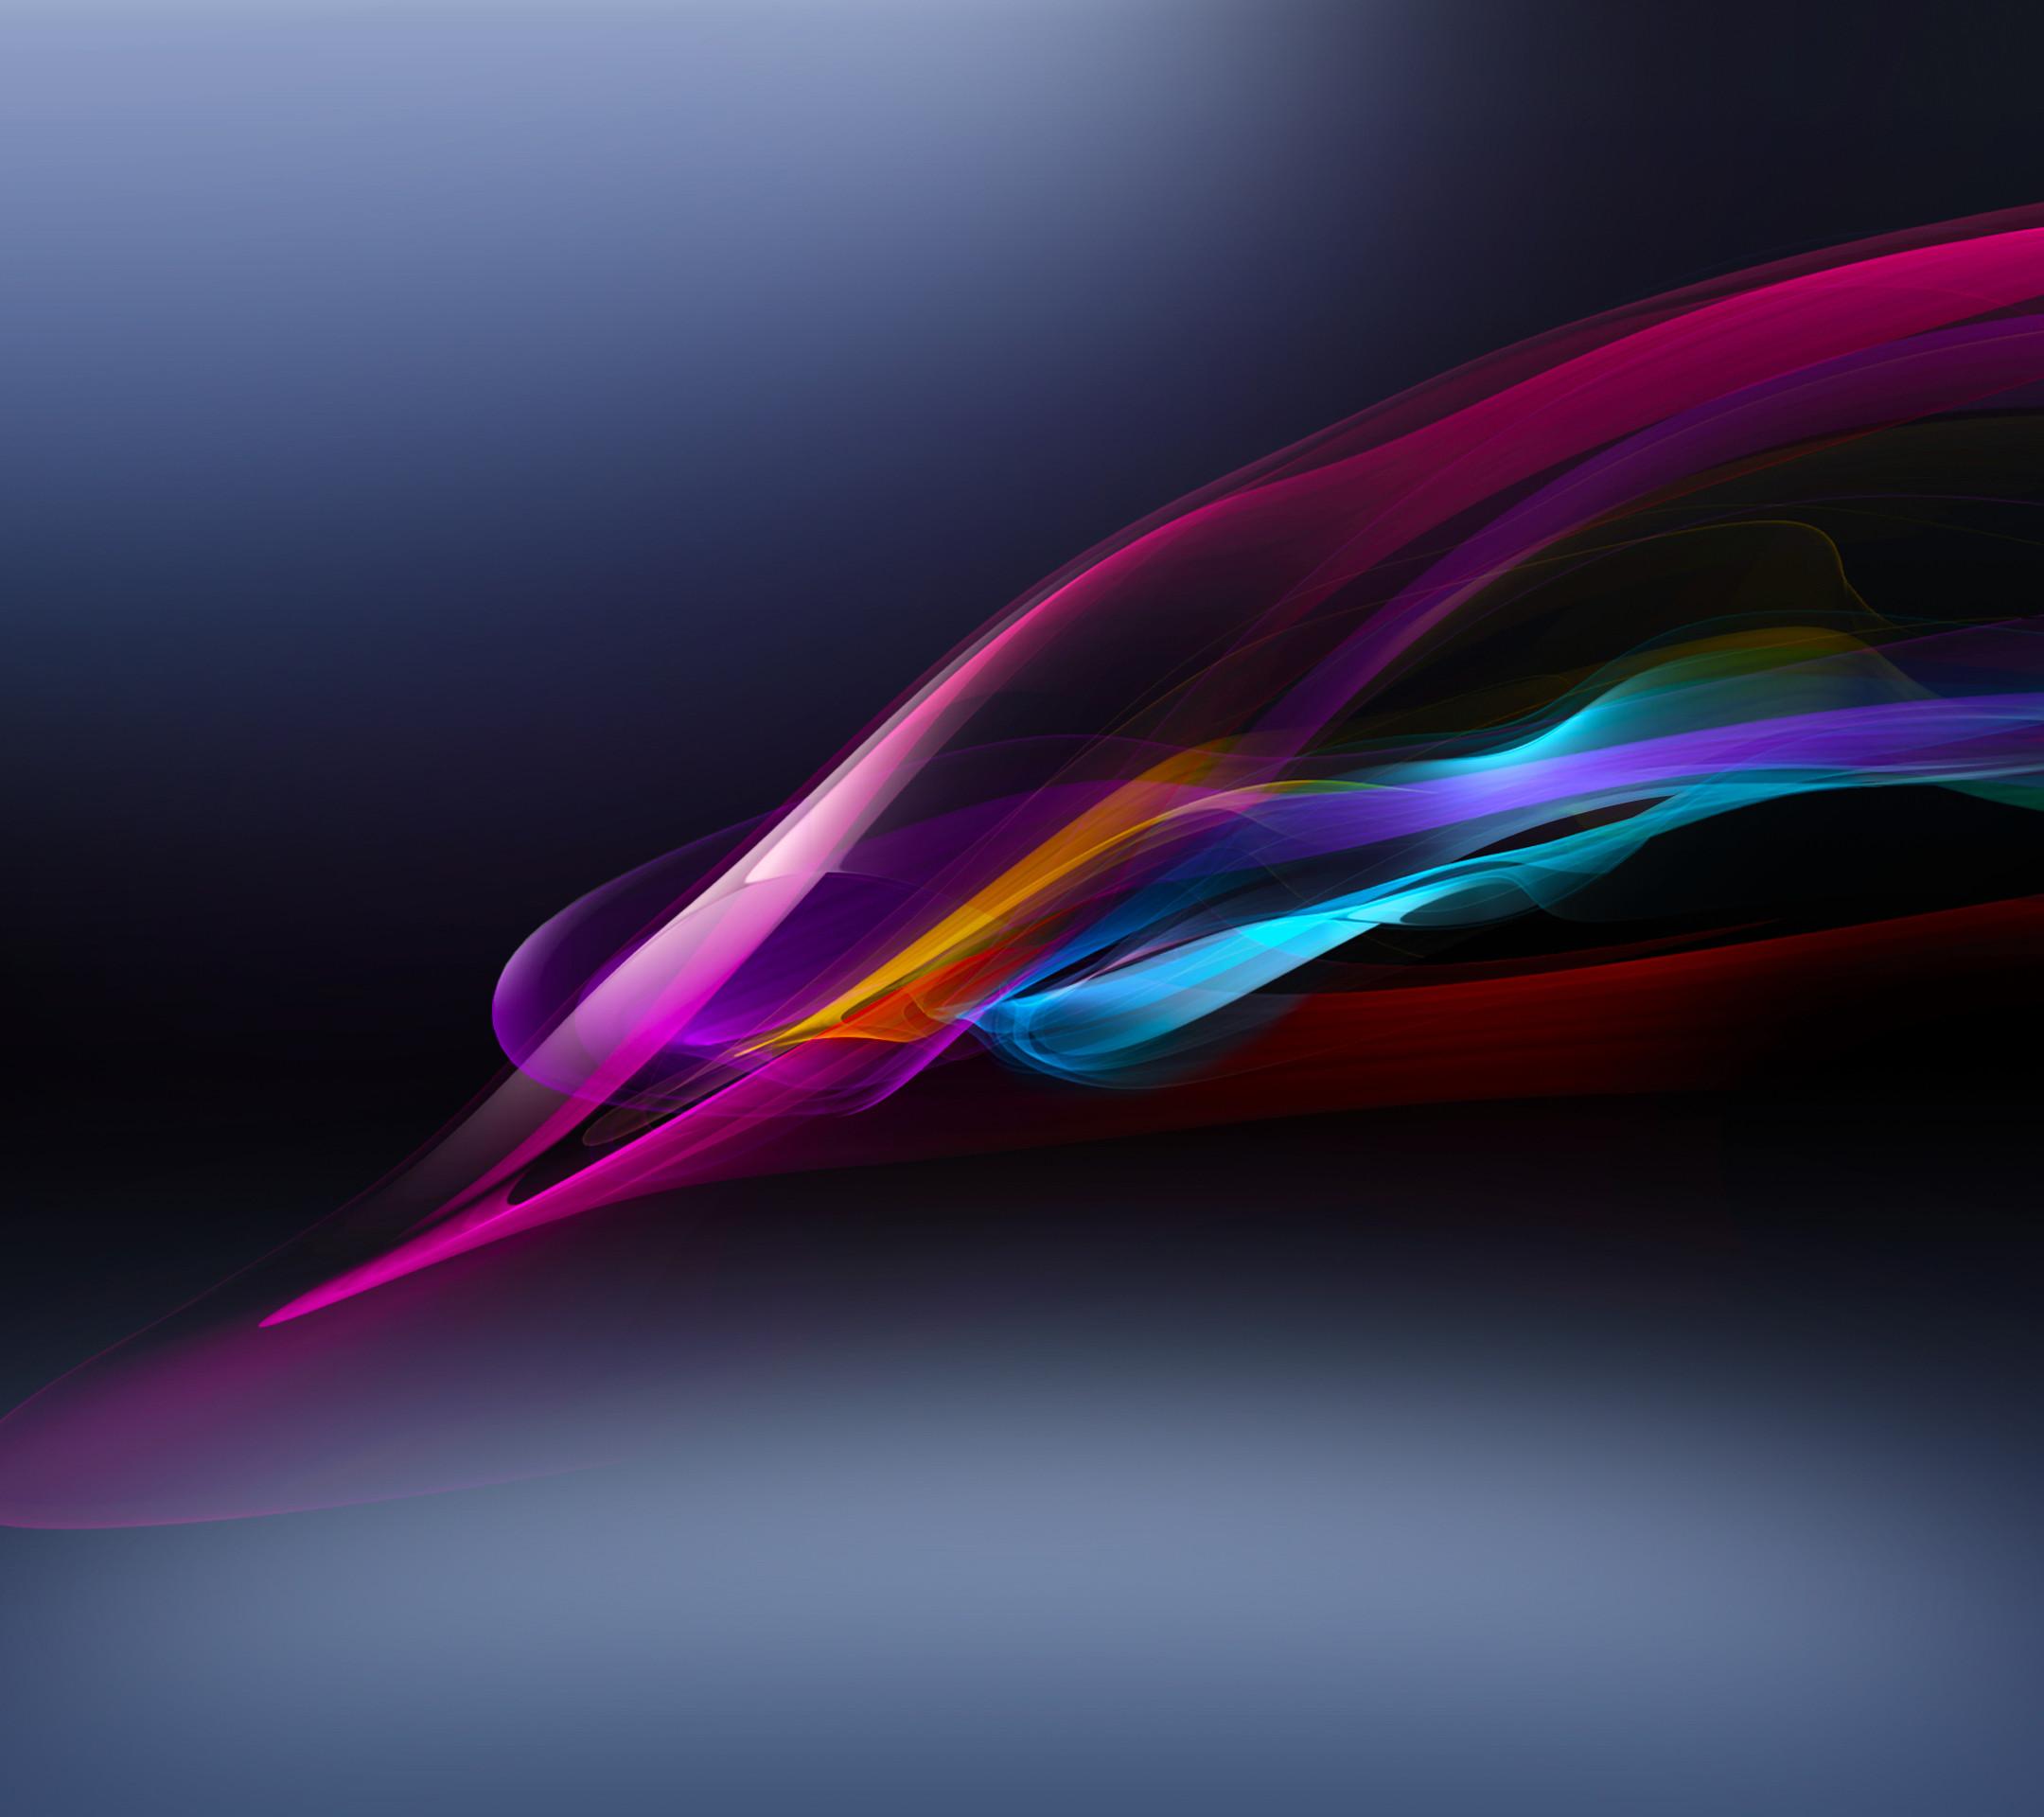 Sony Xperia Z wallpapers now available to download